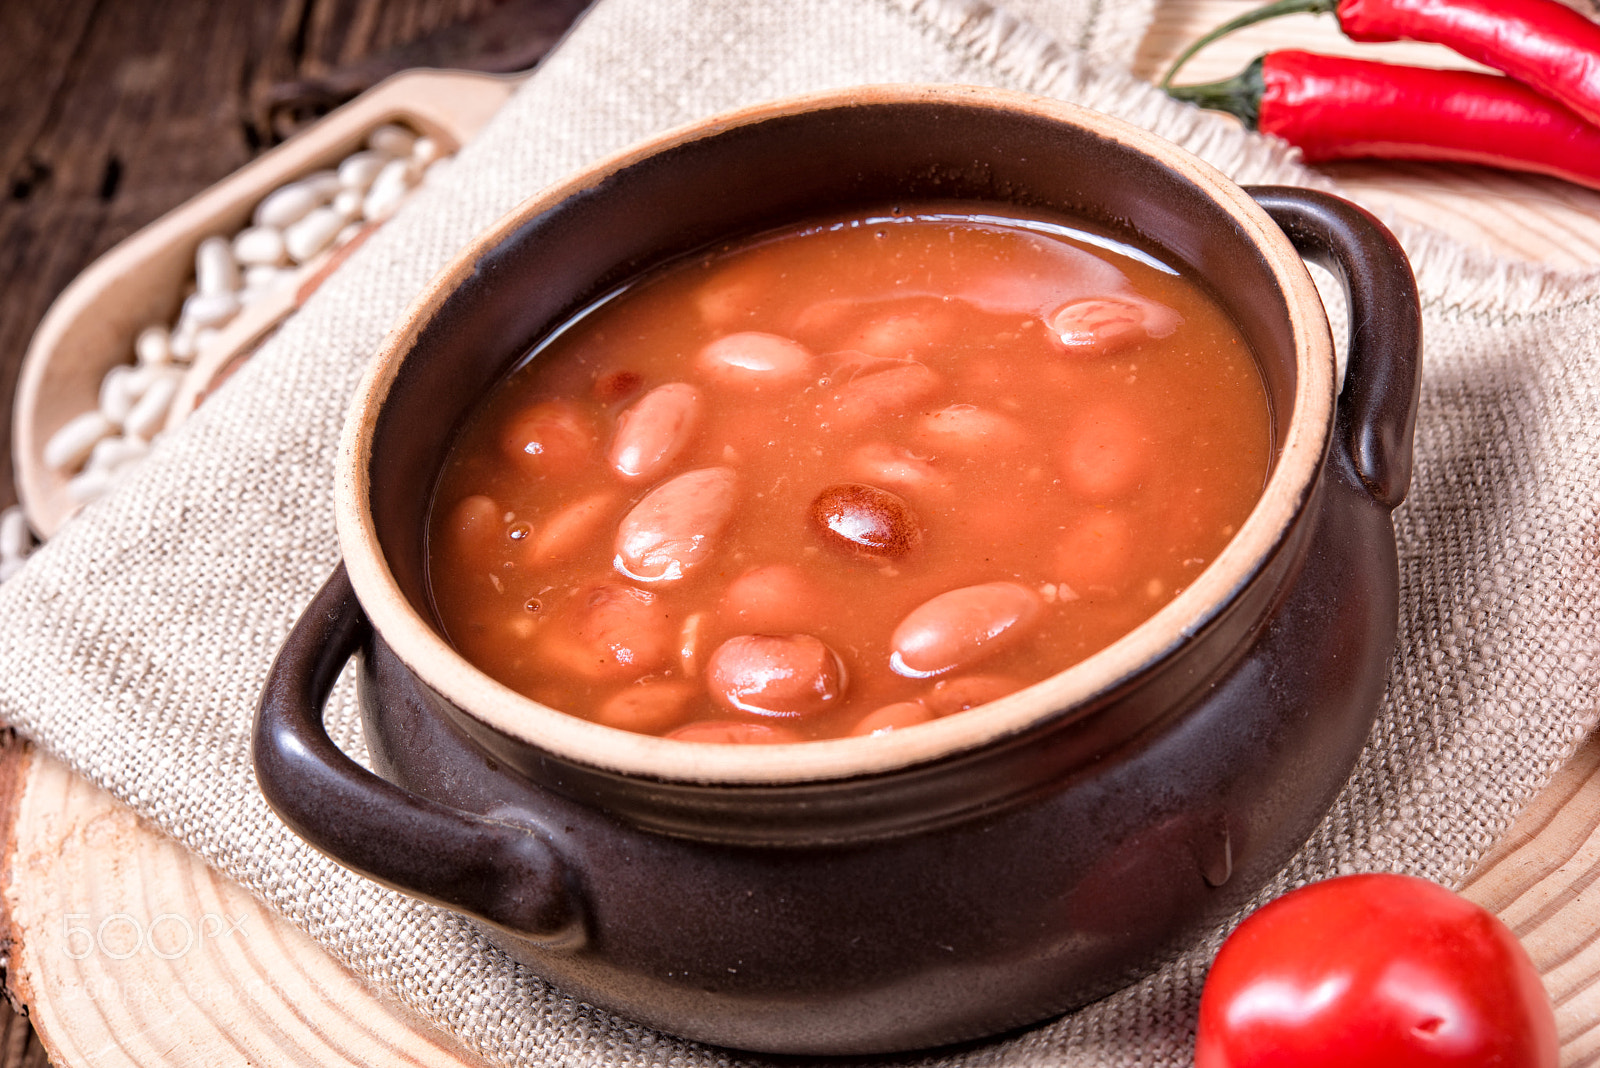 Nikon D810 sample photo. Baked beans in tomato photography